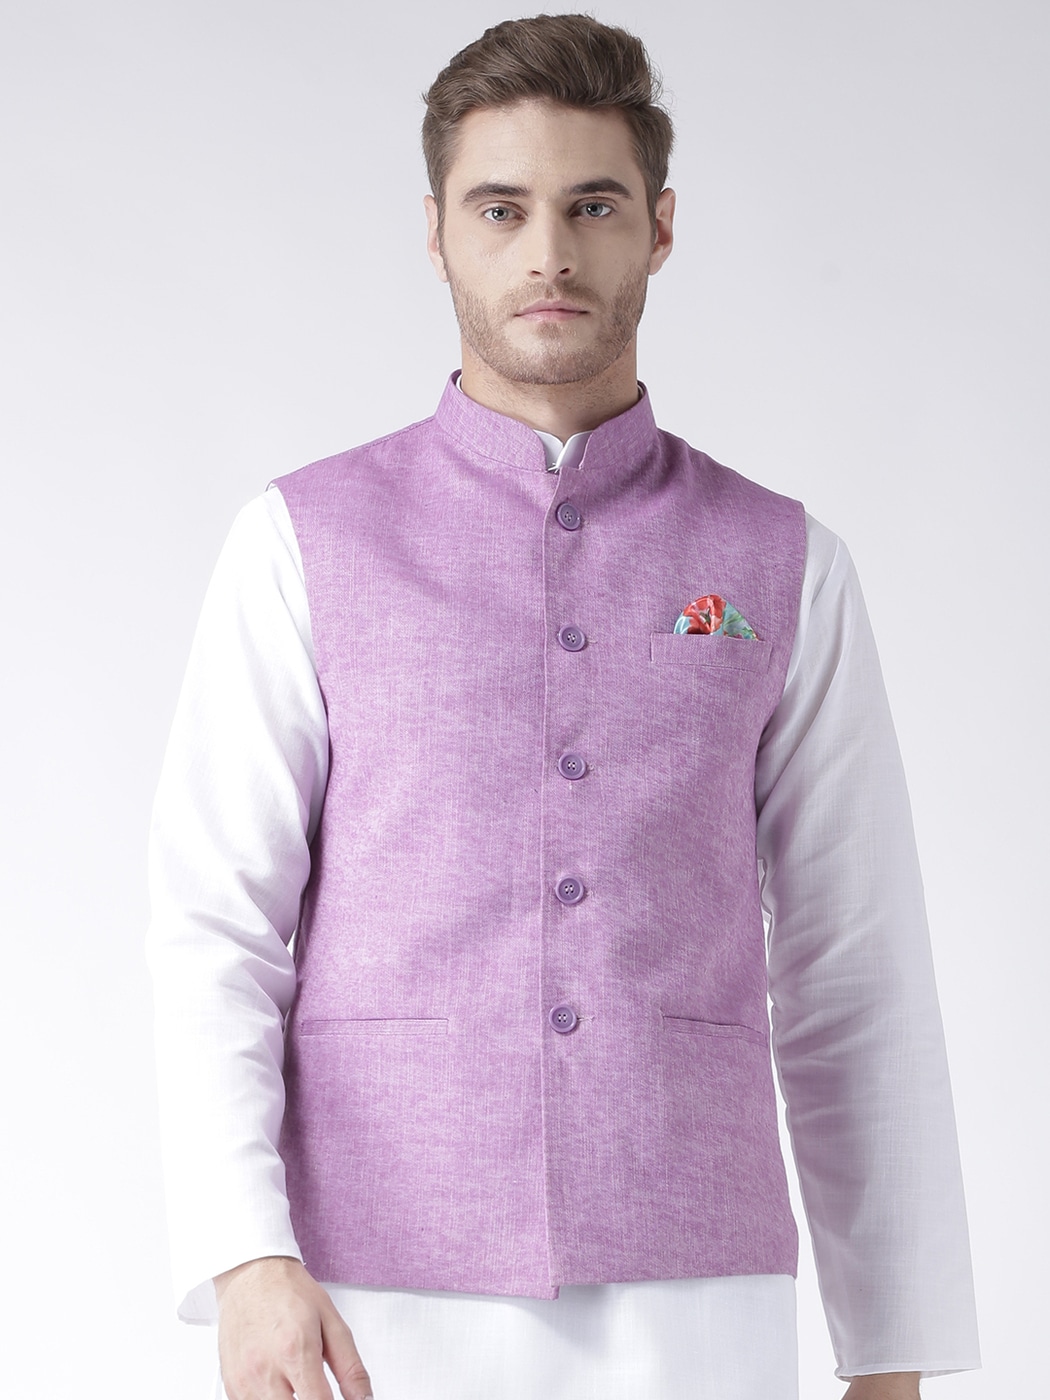 Which color of Nehru jackets should a guy definitely possess? - Quora